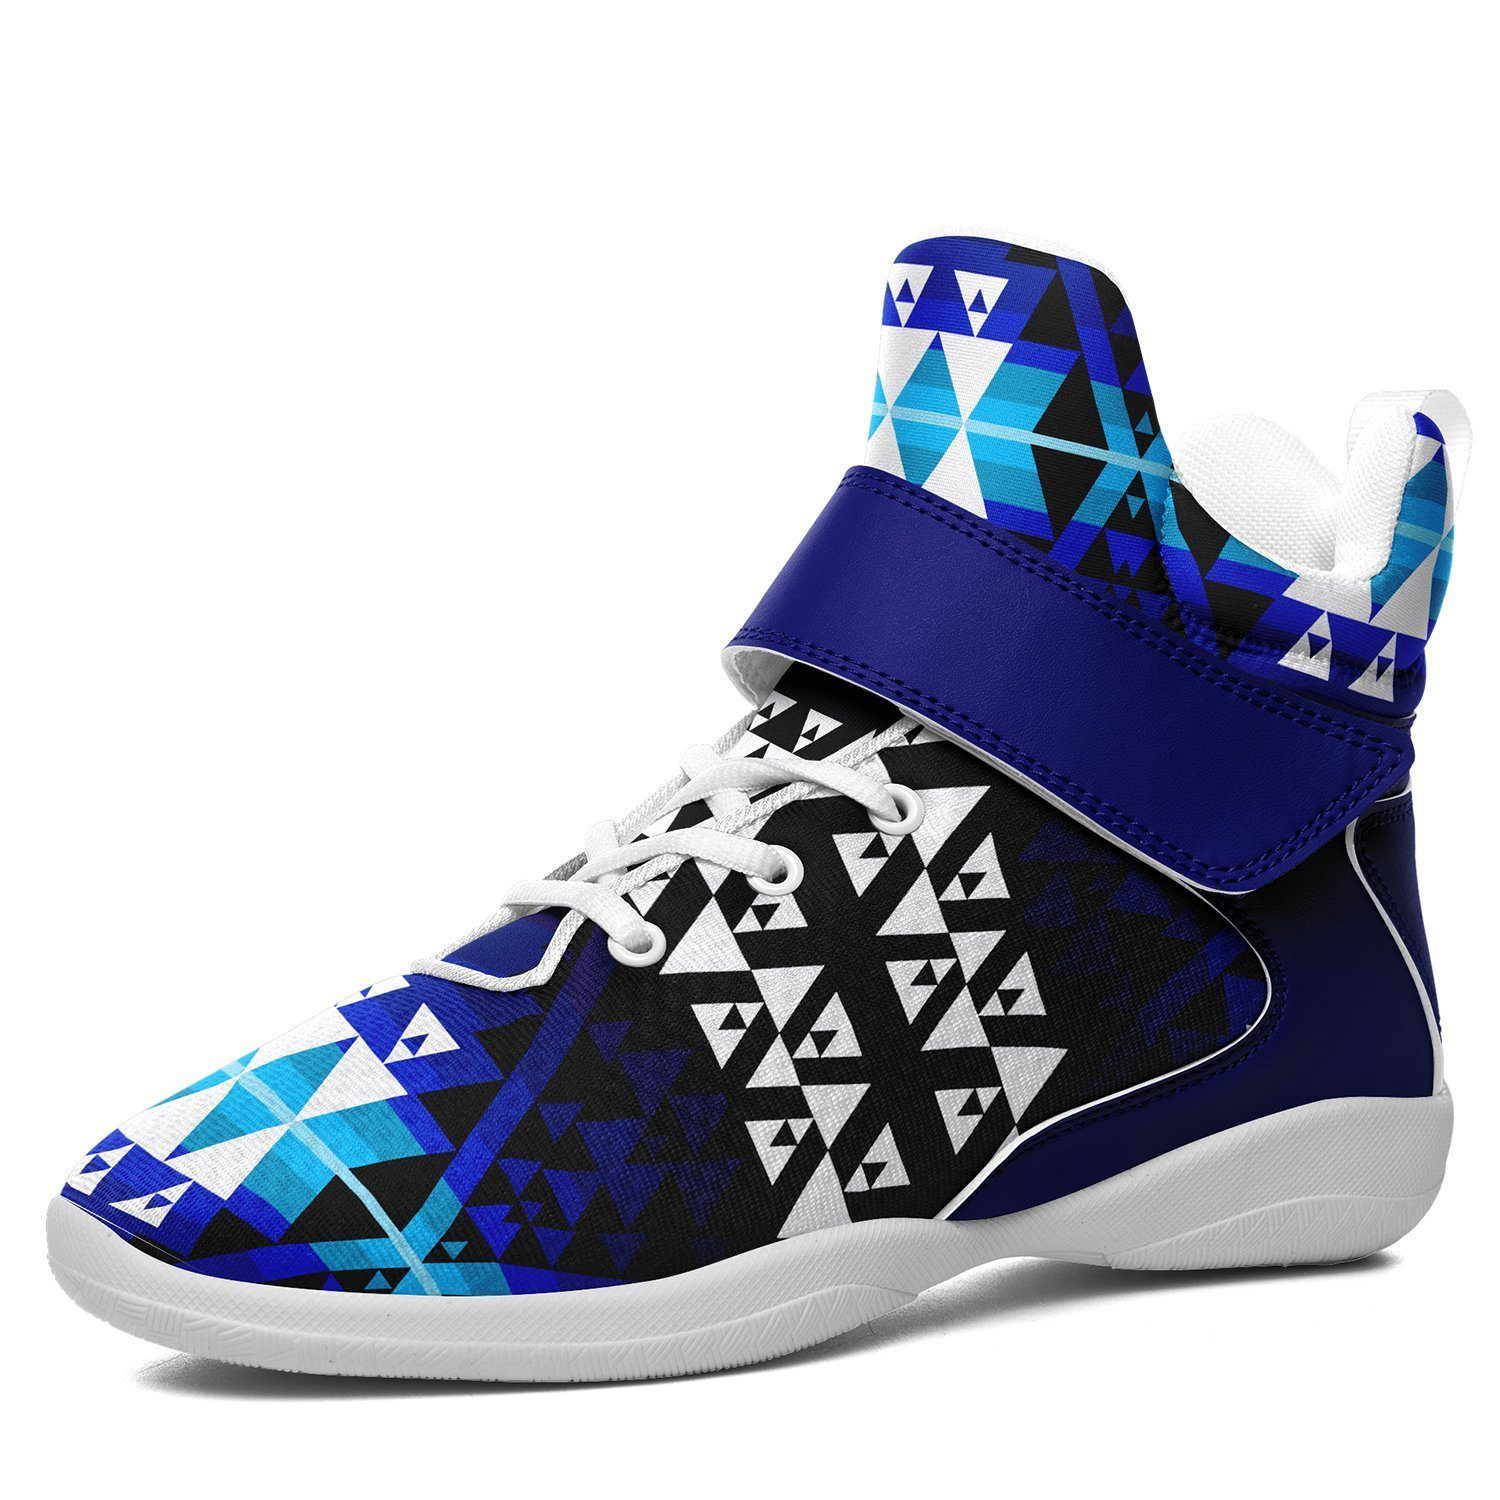 Writing on Stone Night Watch Kid's Ipottaa Basketball / Sport High Top Shoes 49 Dzine US Child 12.5 / EUR 30 White Sole with Blue Strap 